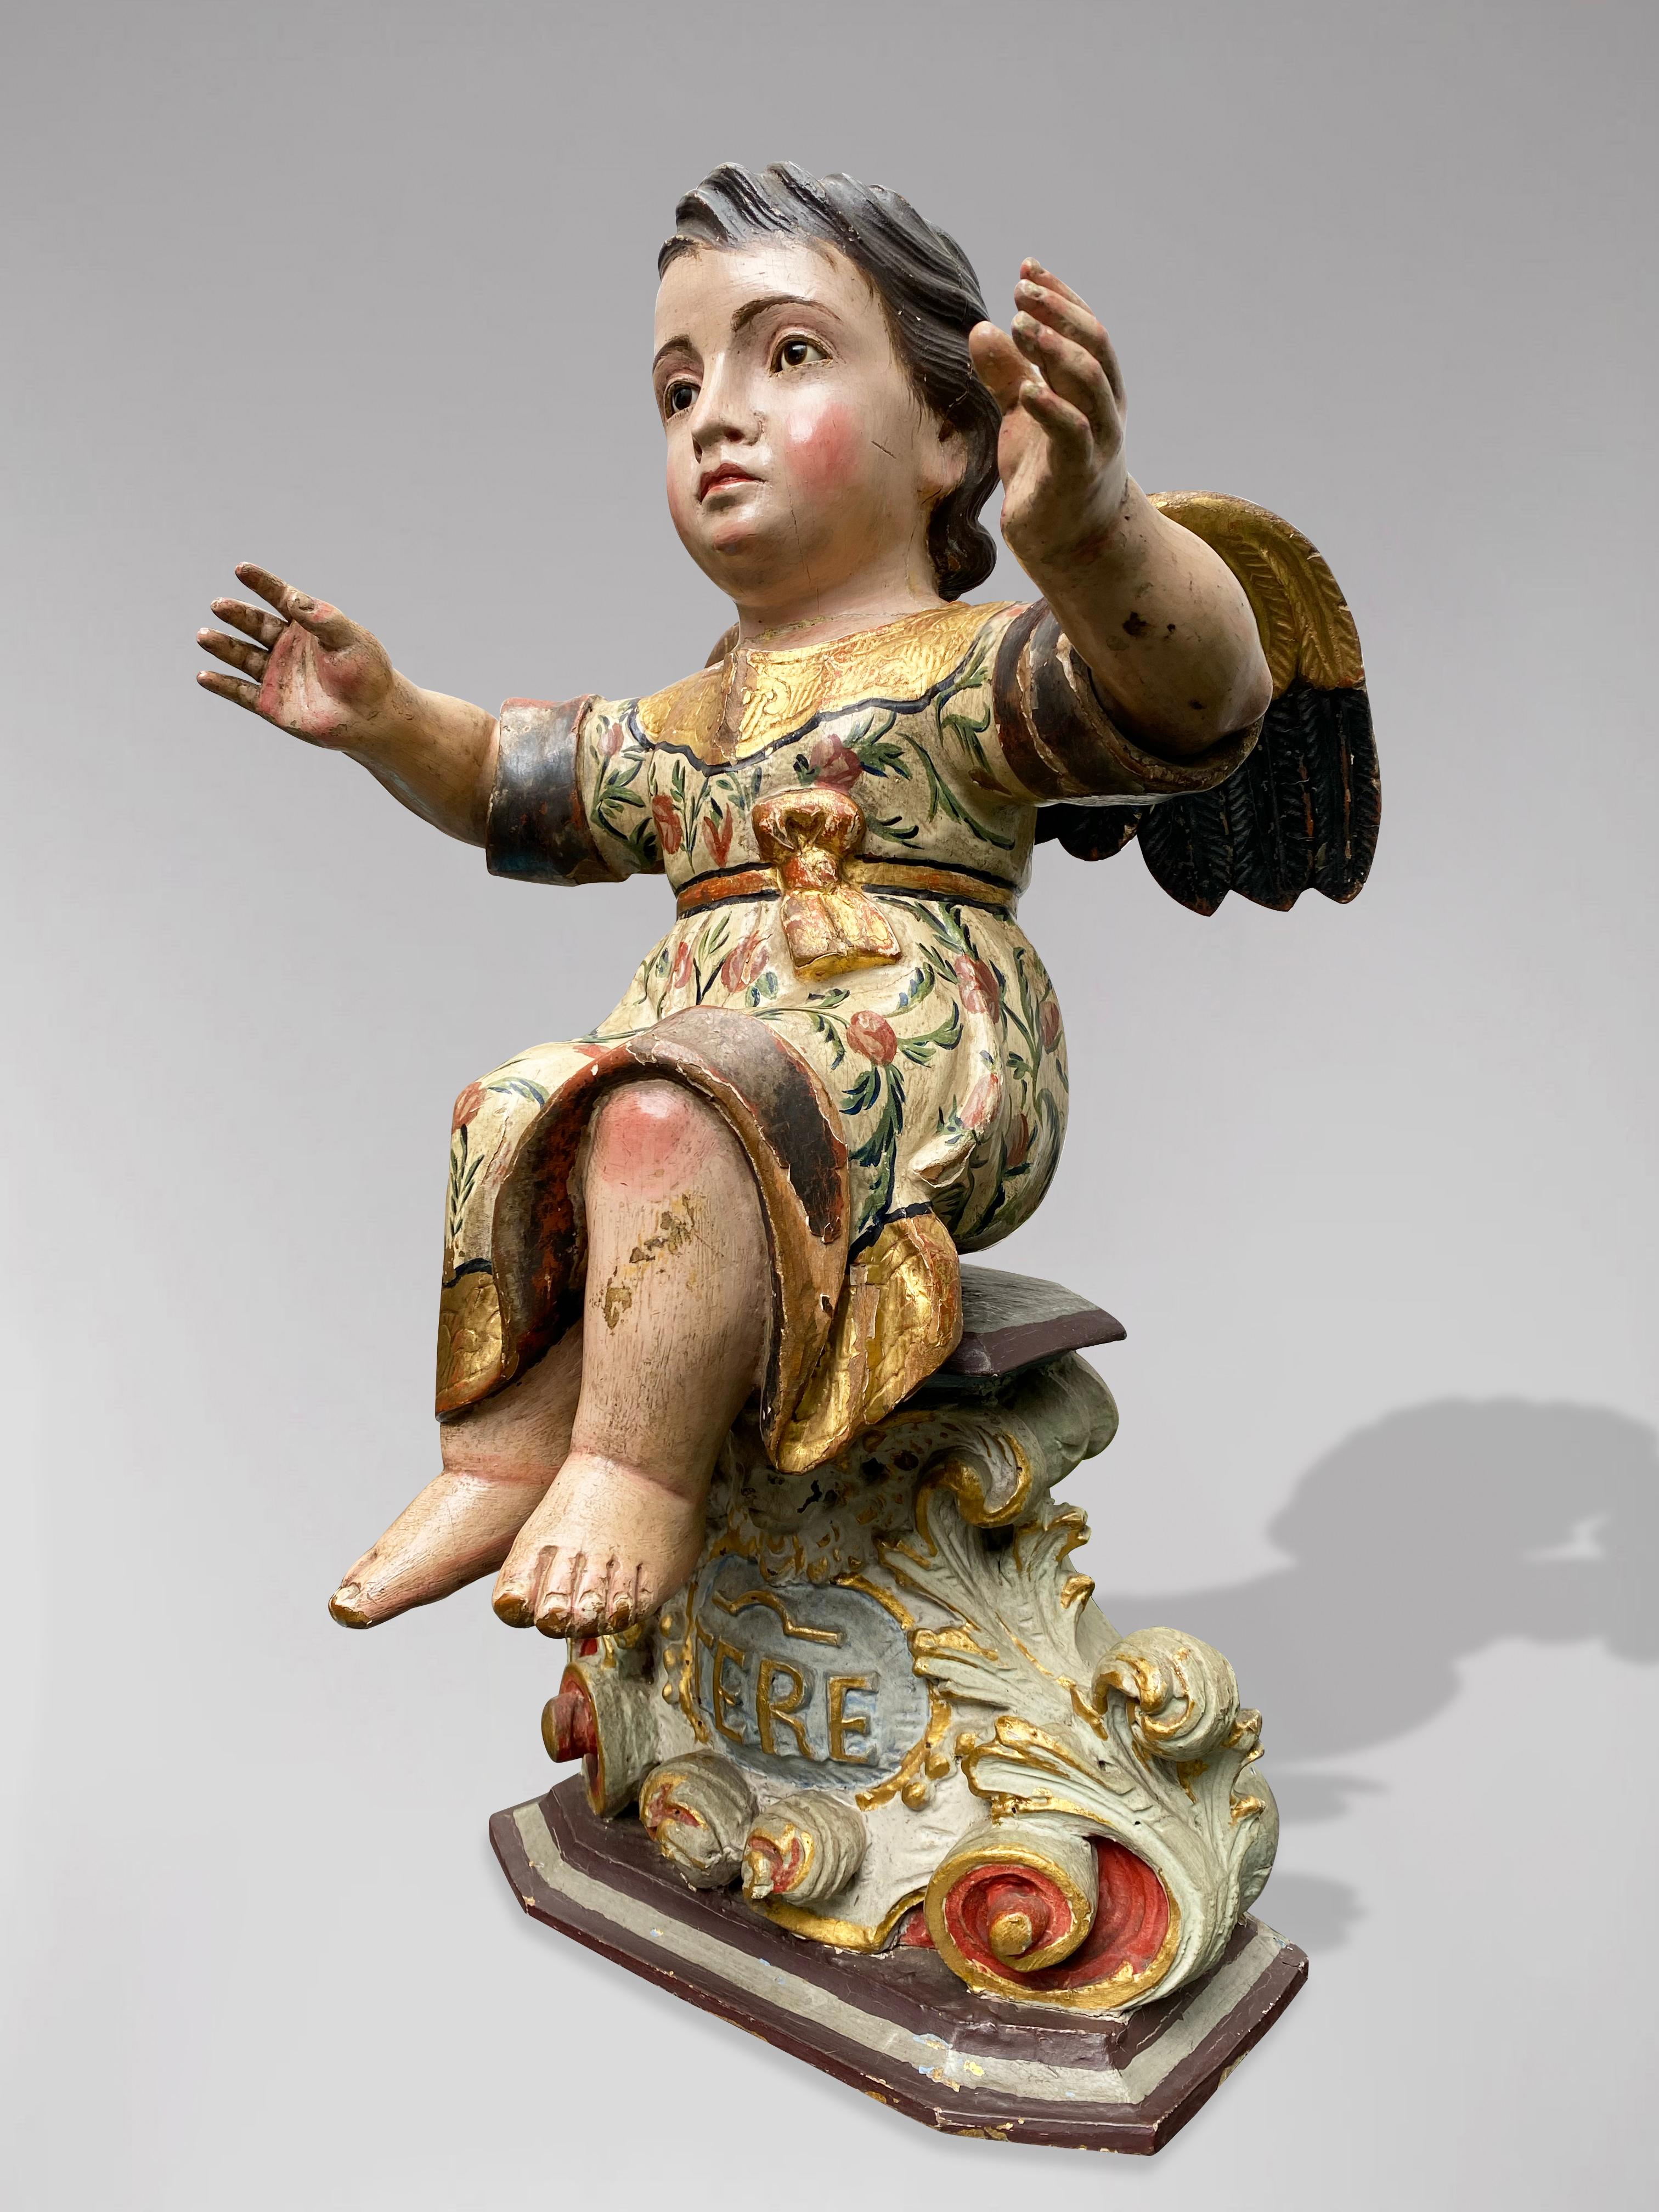 A Spanish Statue of a Sitting on a Pedestal Angel with Open Arms, Early 19th C - Sculpture by Unknown